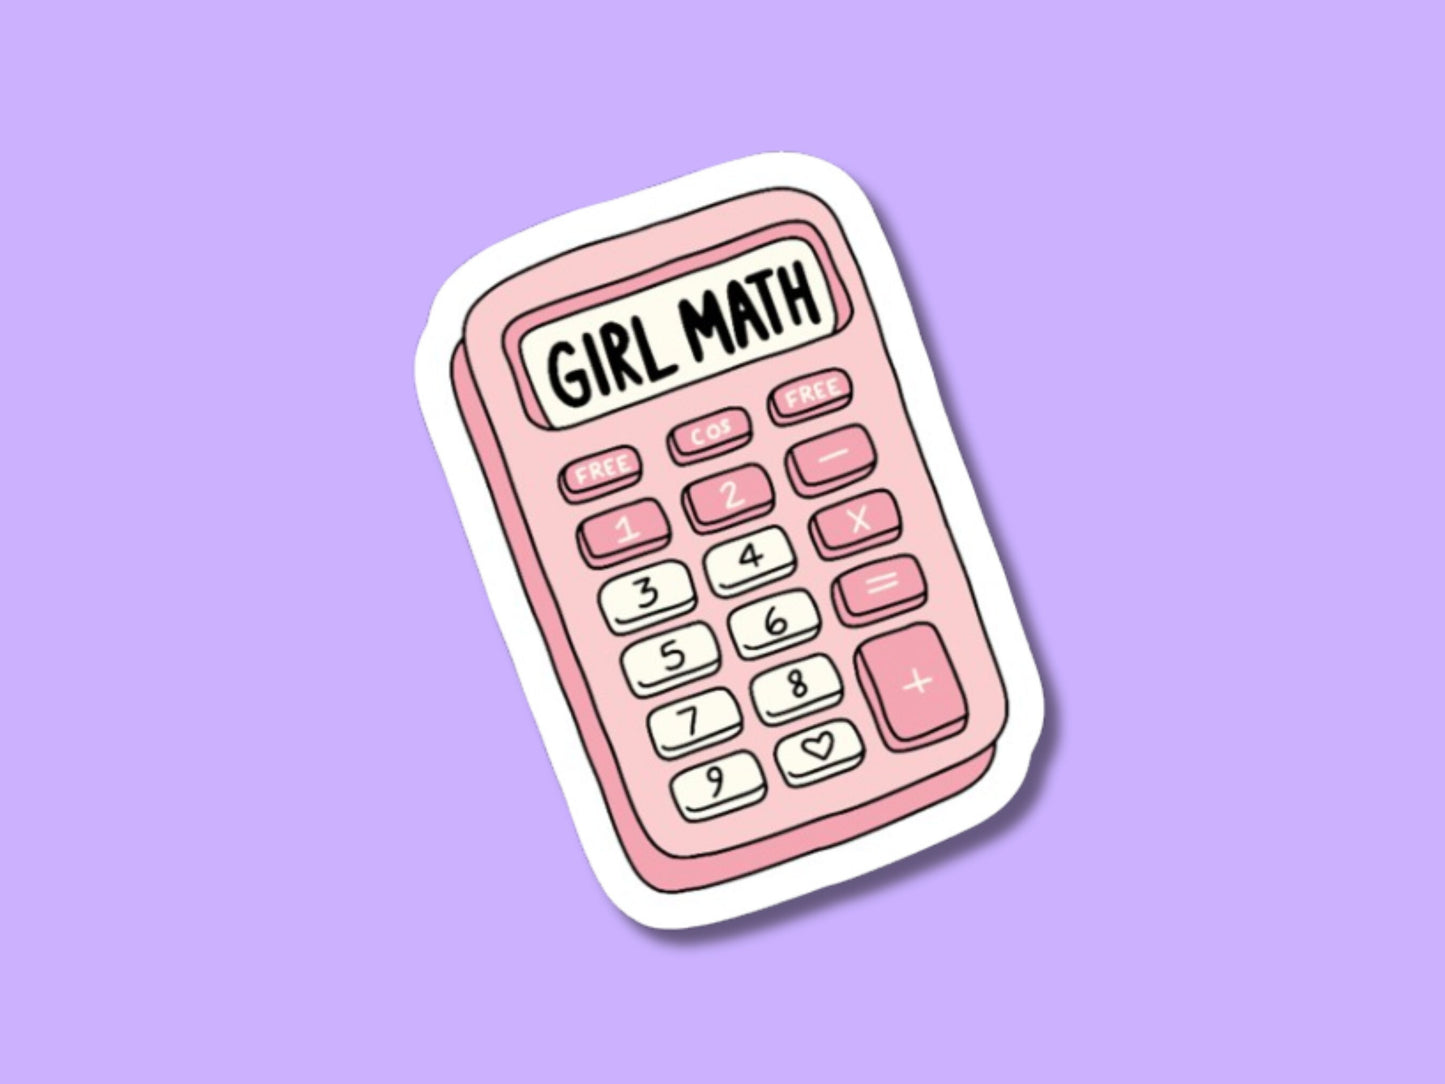 girl math sticker, funny stickers for friends, girl math is the best math , laptop stickers, coworker stickers